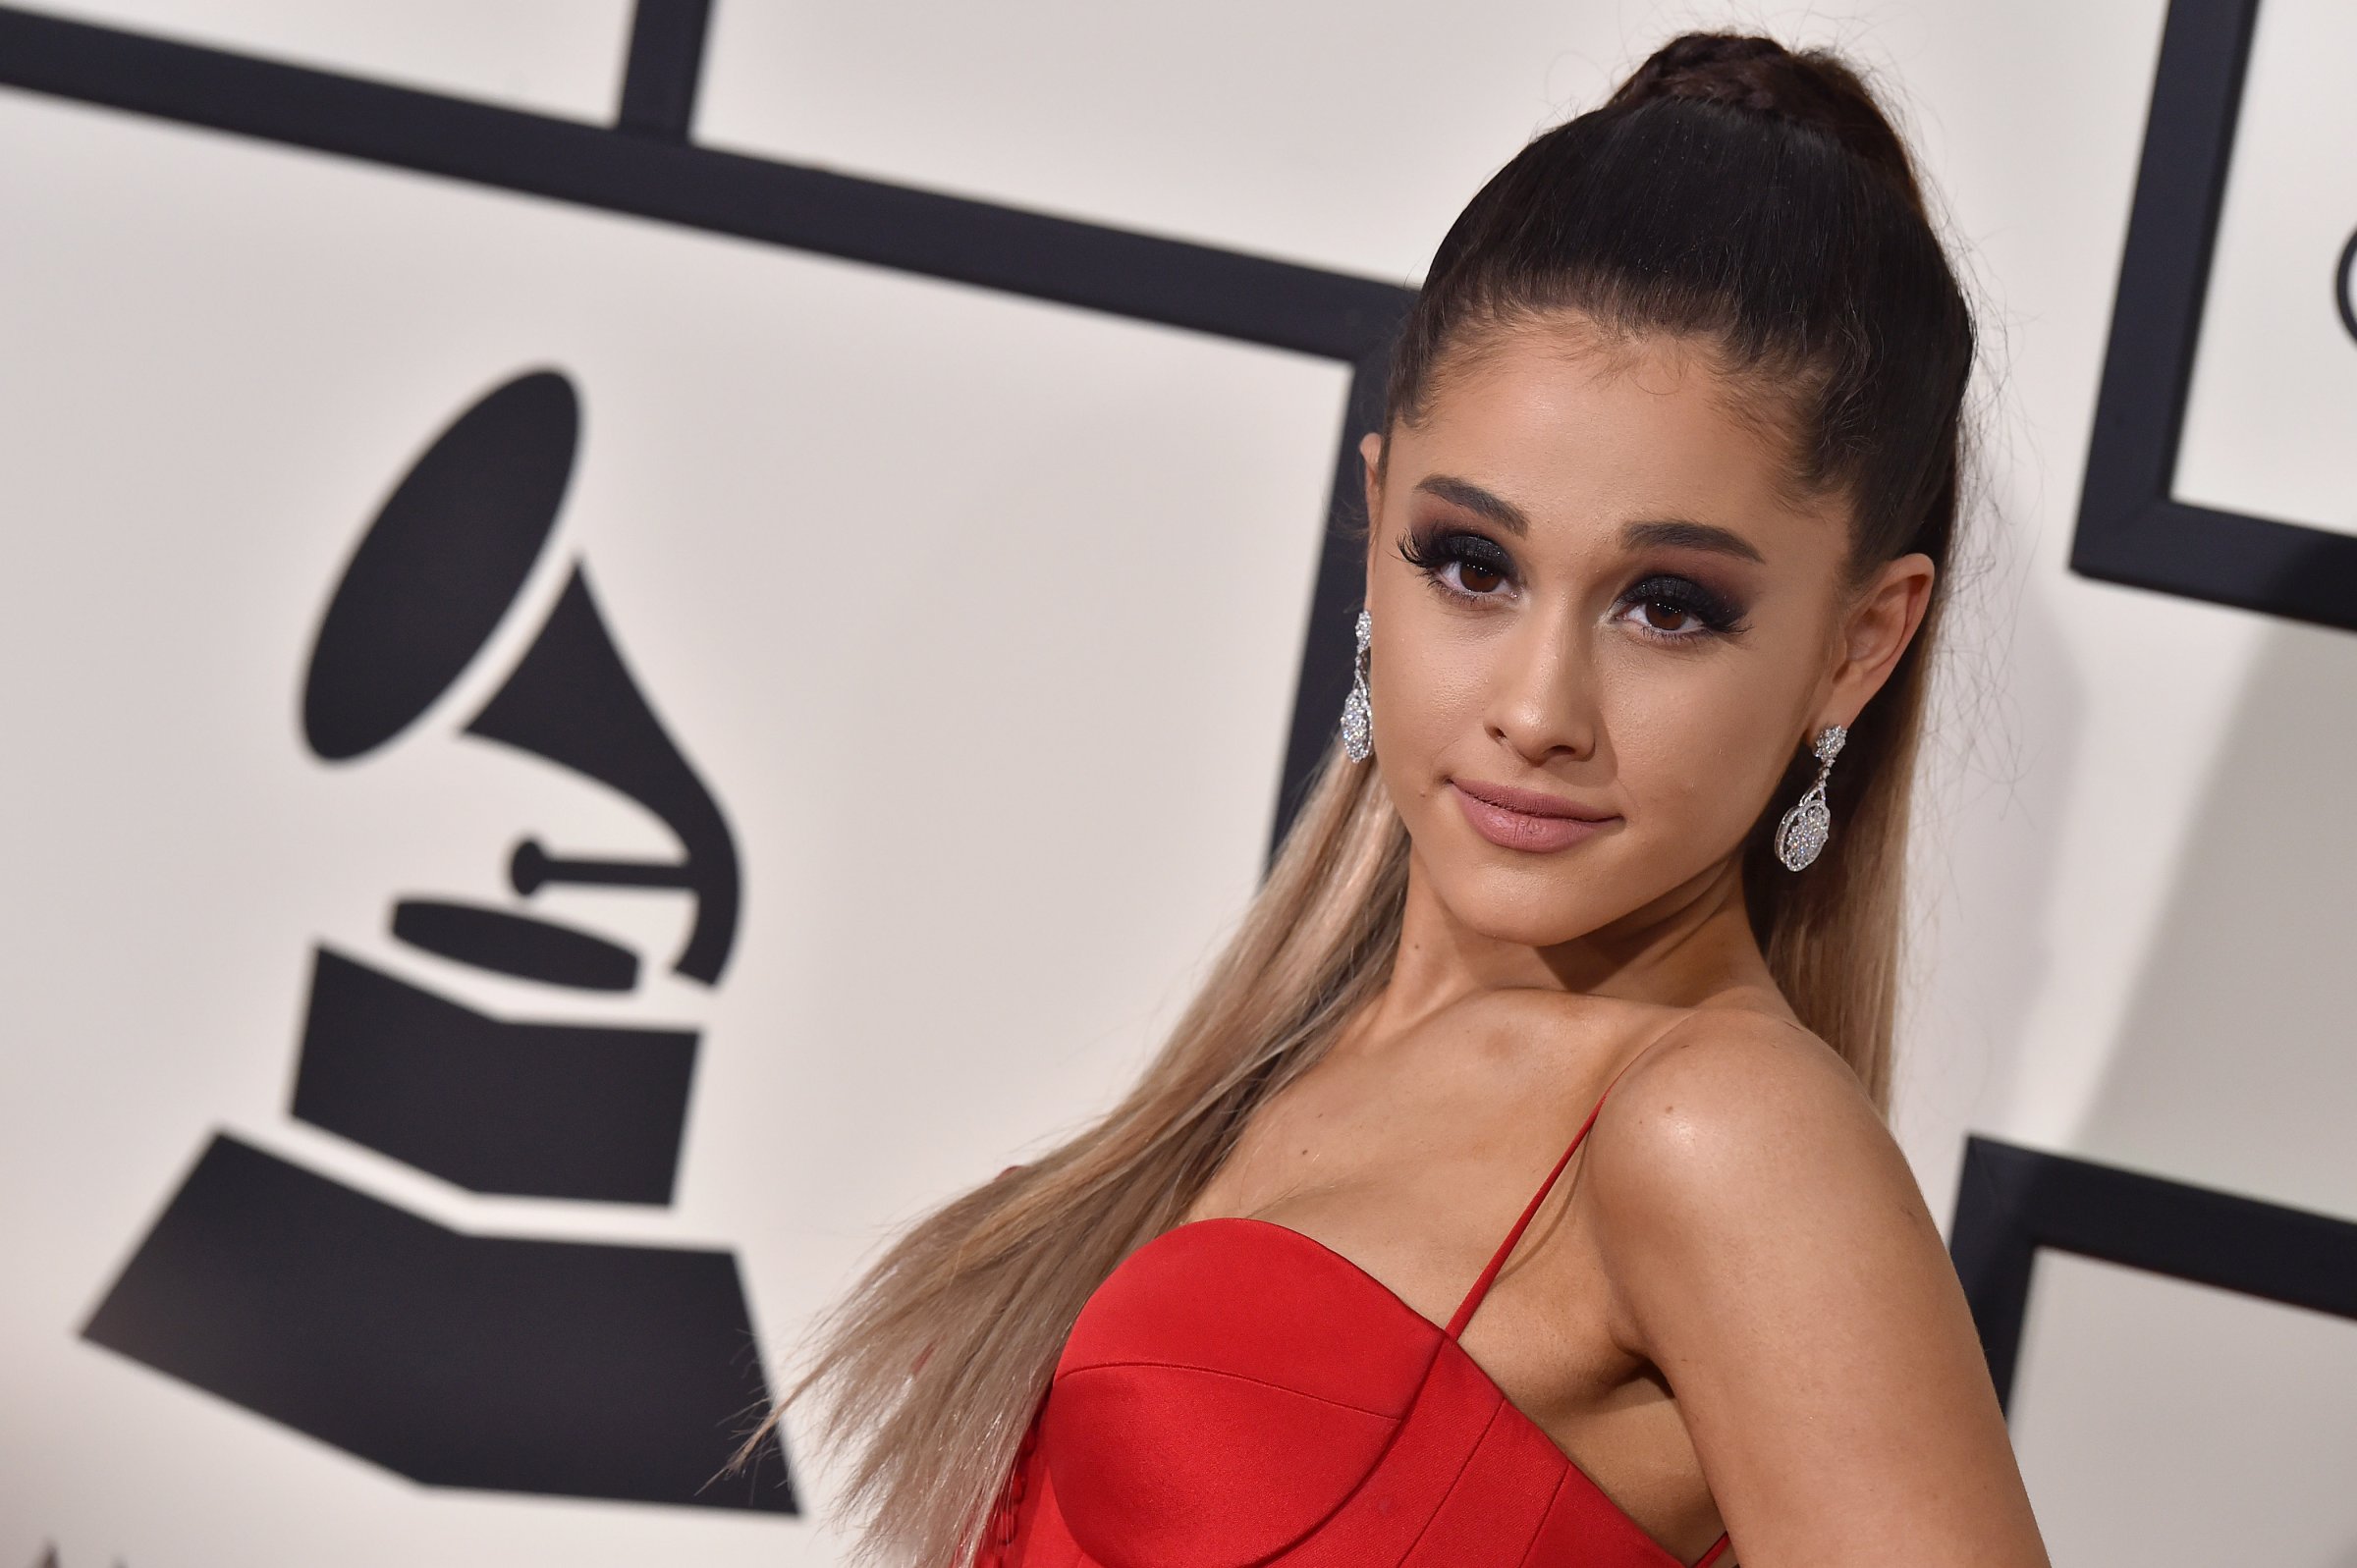 Singer Ariana Grande arrives at The 58th GRAMMY Awards at Staples Center on February 15, 2016 in Los Angeles, California.